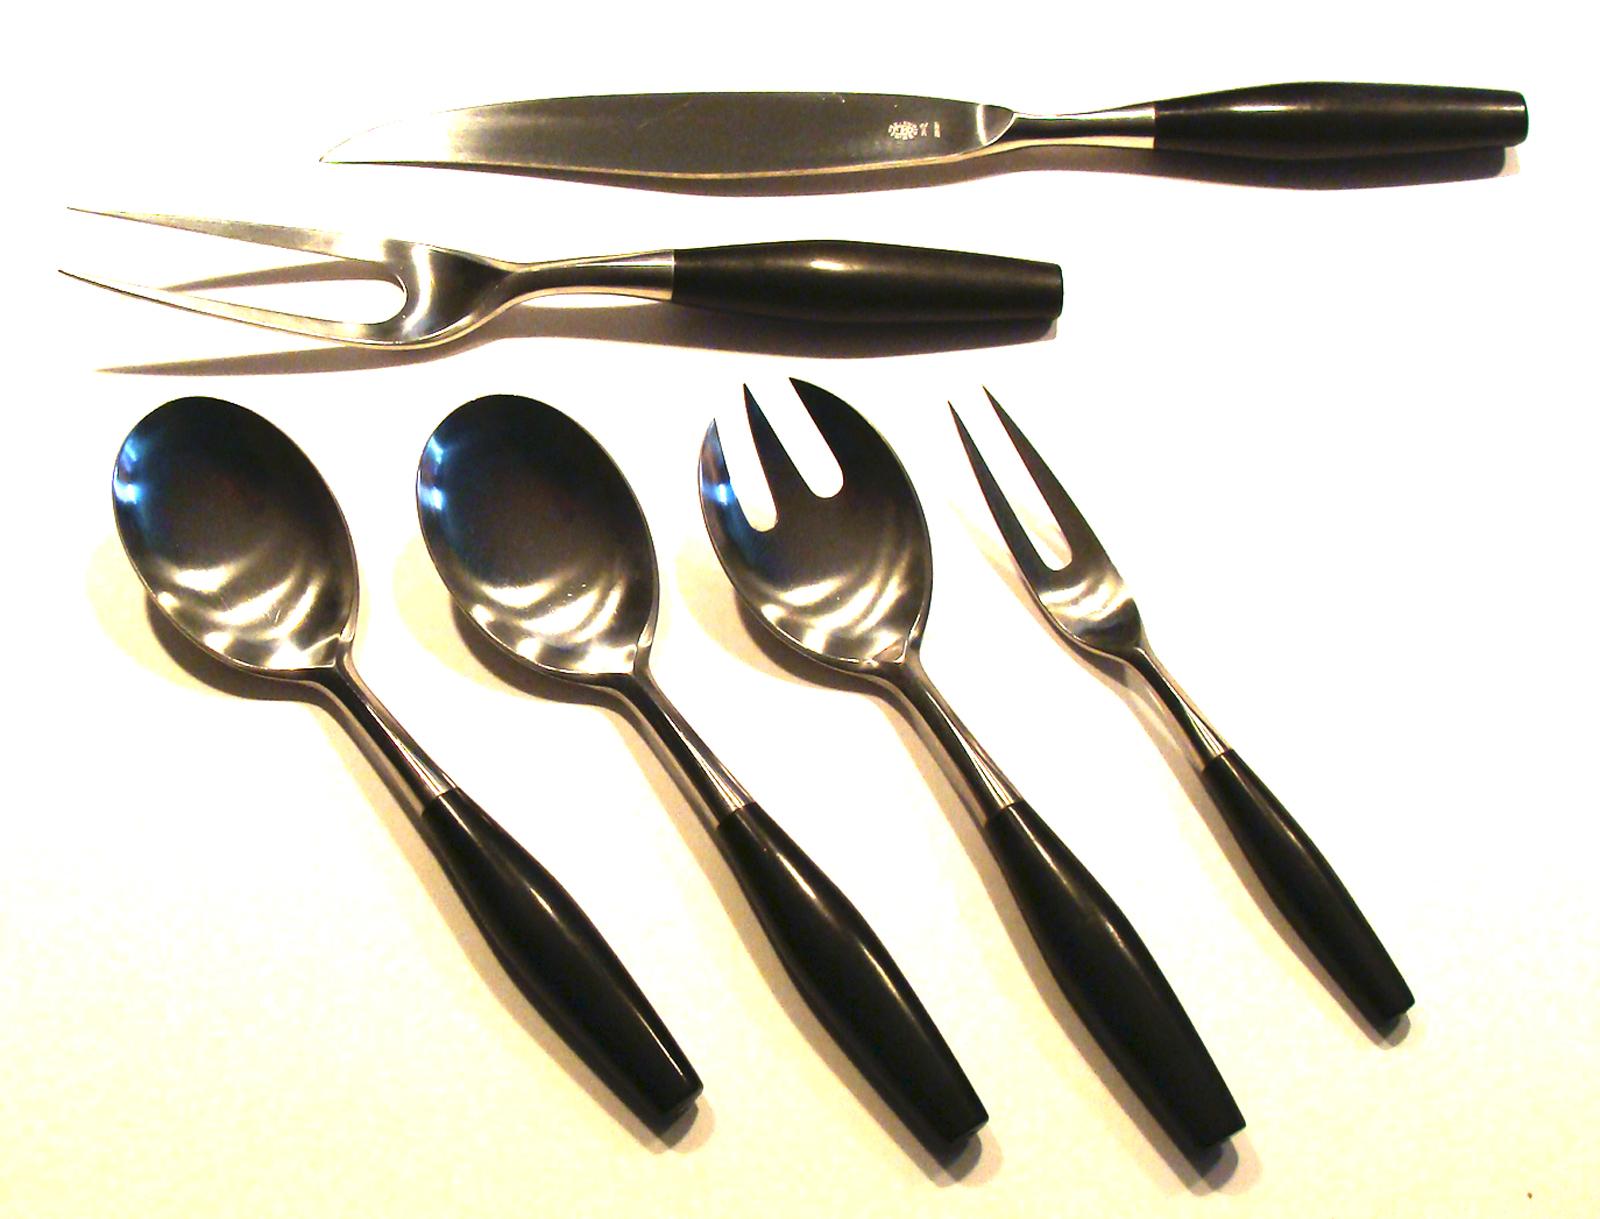 Vintage Dansk Kongo serving/accessory pieces designed Jens Quistgaard to accompany iconic flatware (see separate listing). Crafted, circa 1958. Sold as a set of thirteen (13) as shown in photo. Featuring stainless steel with ebony nylon handles